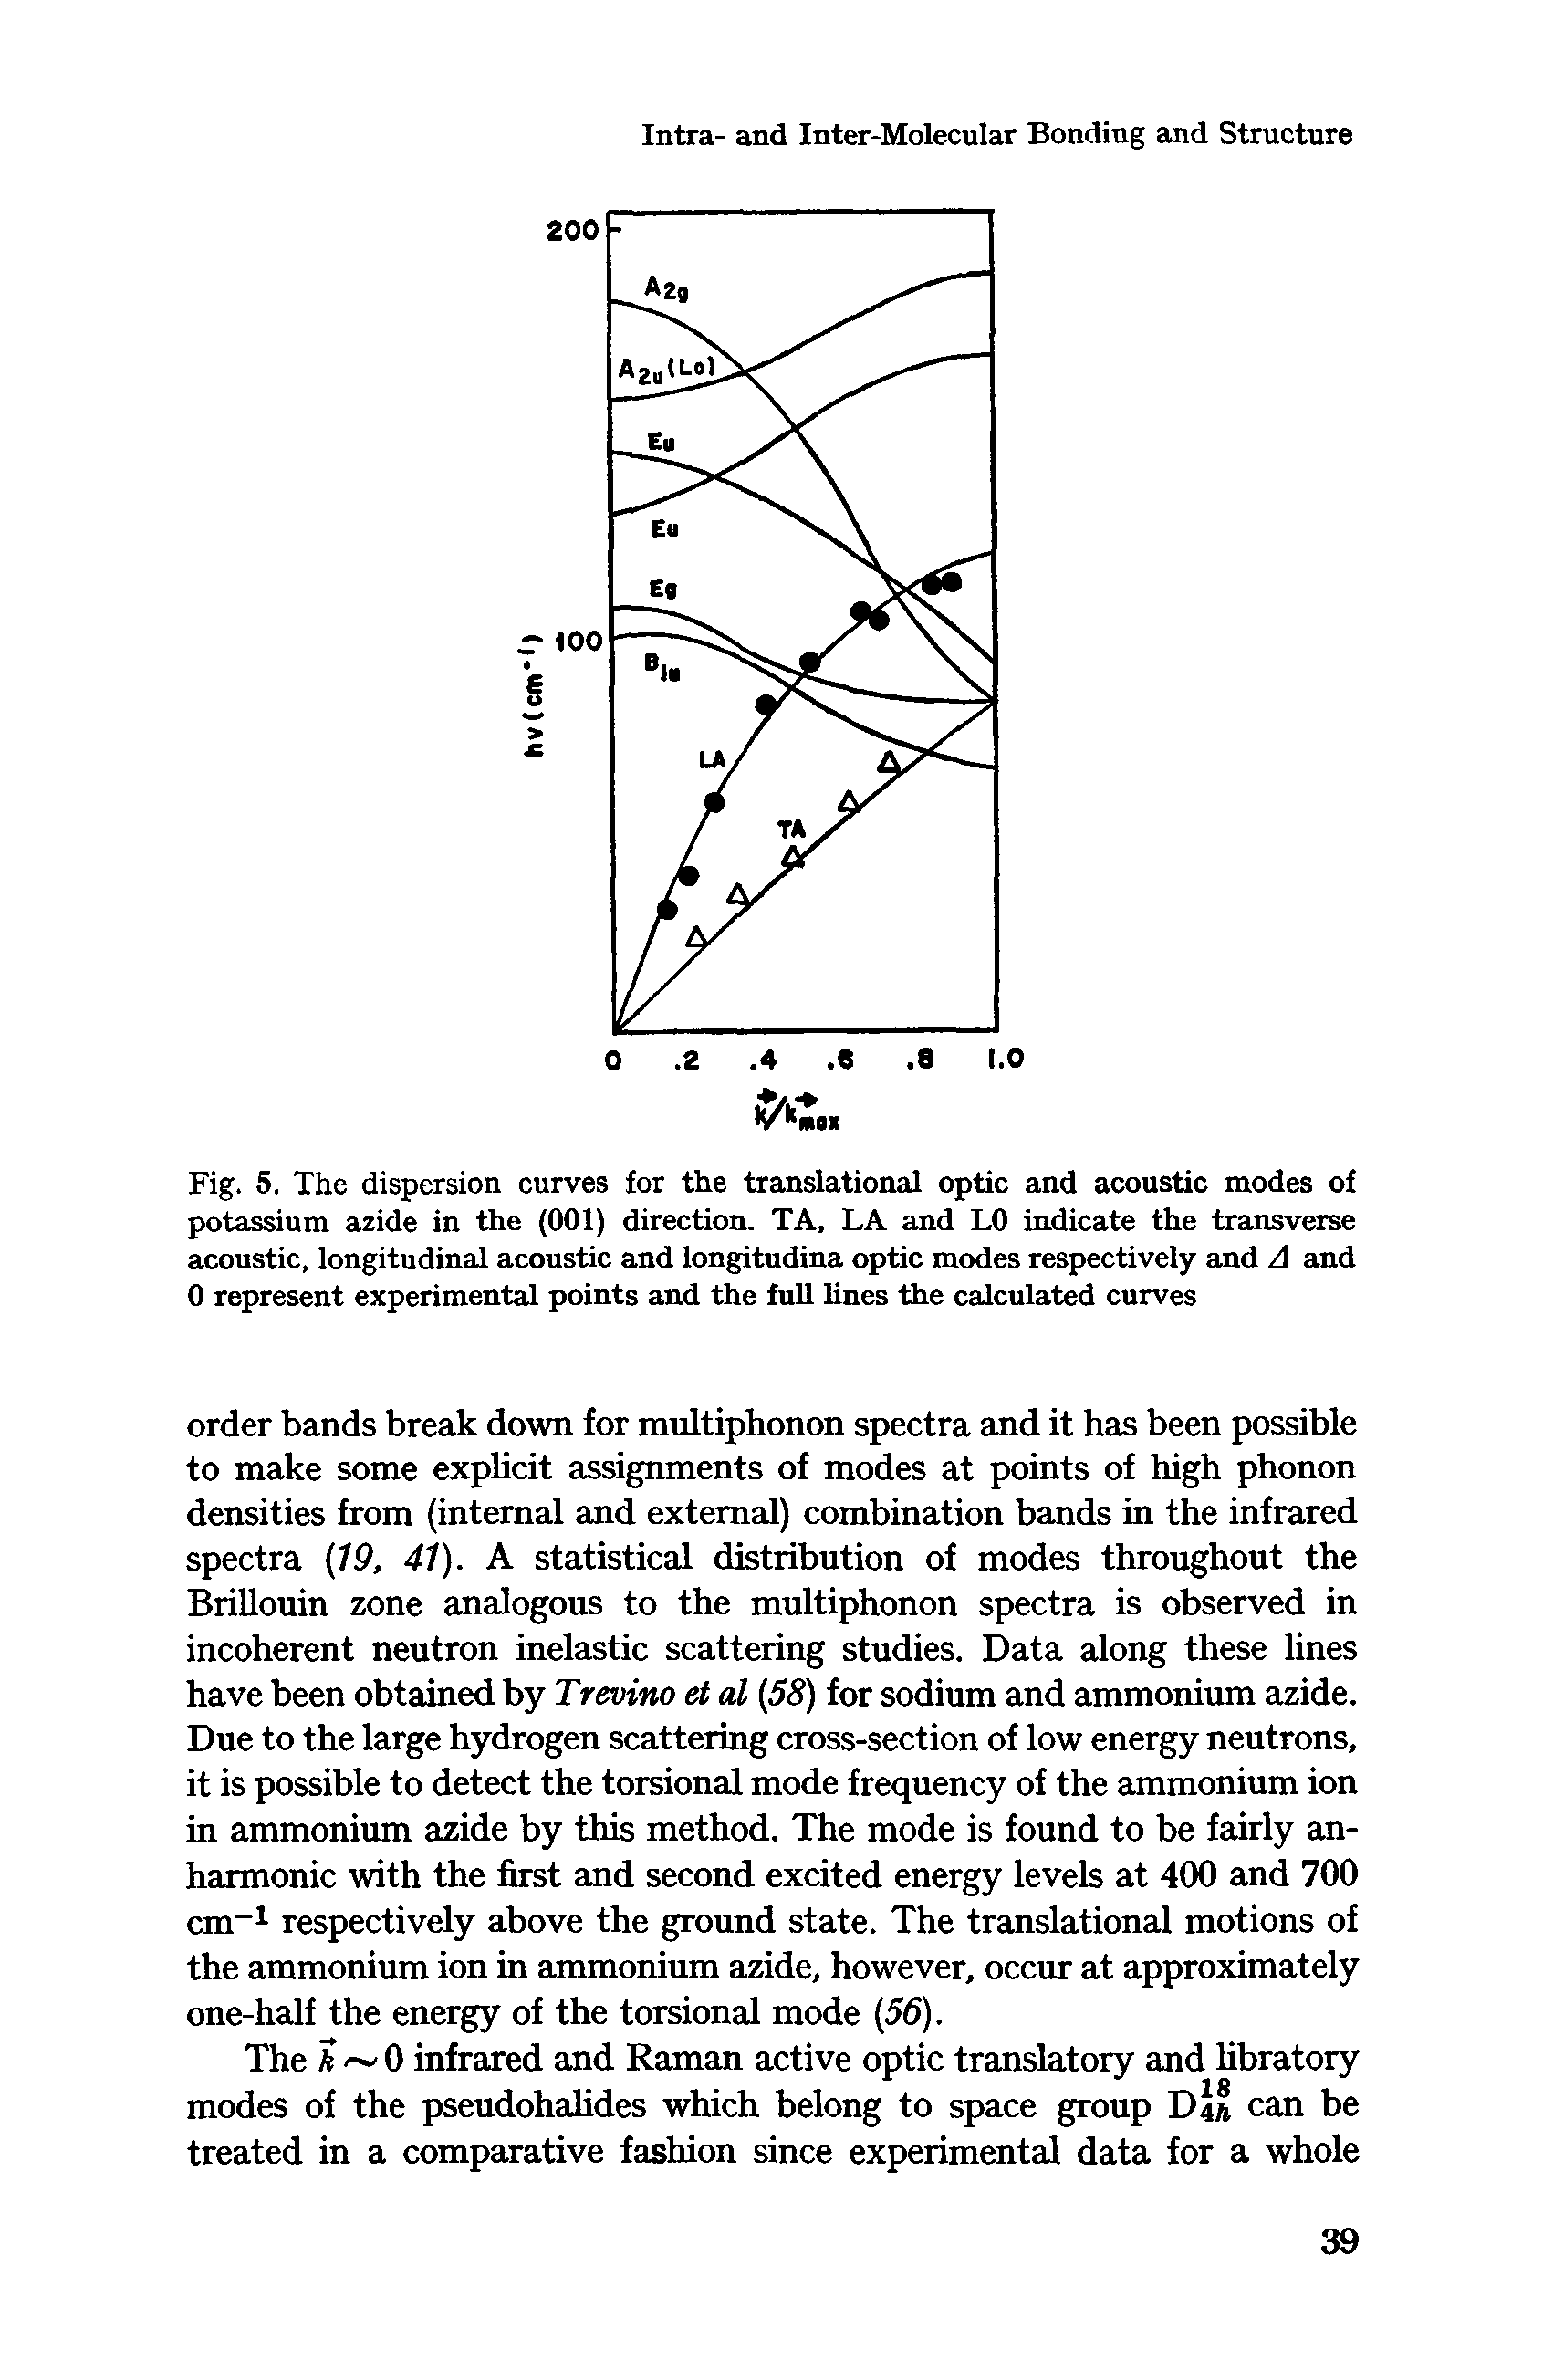 Fig. 5. The dispersion curves for the translational optic and acoustic modes of potassium azide in the (001) direction. TA. LA and LO indicate the transverse acoustic, longitudinal acoustic and longitudina optic modes respectively and A and 0 represent experimental points and the full lines the calculated curves...